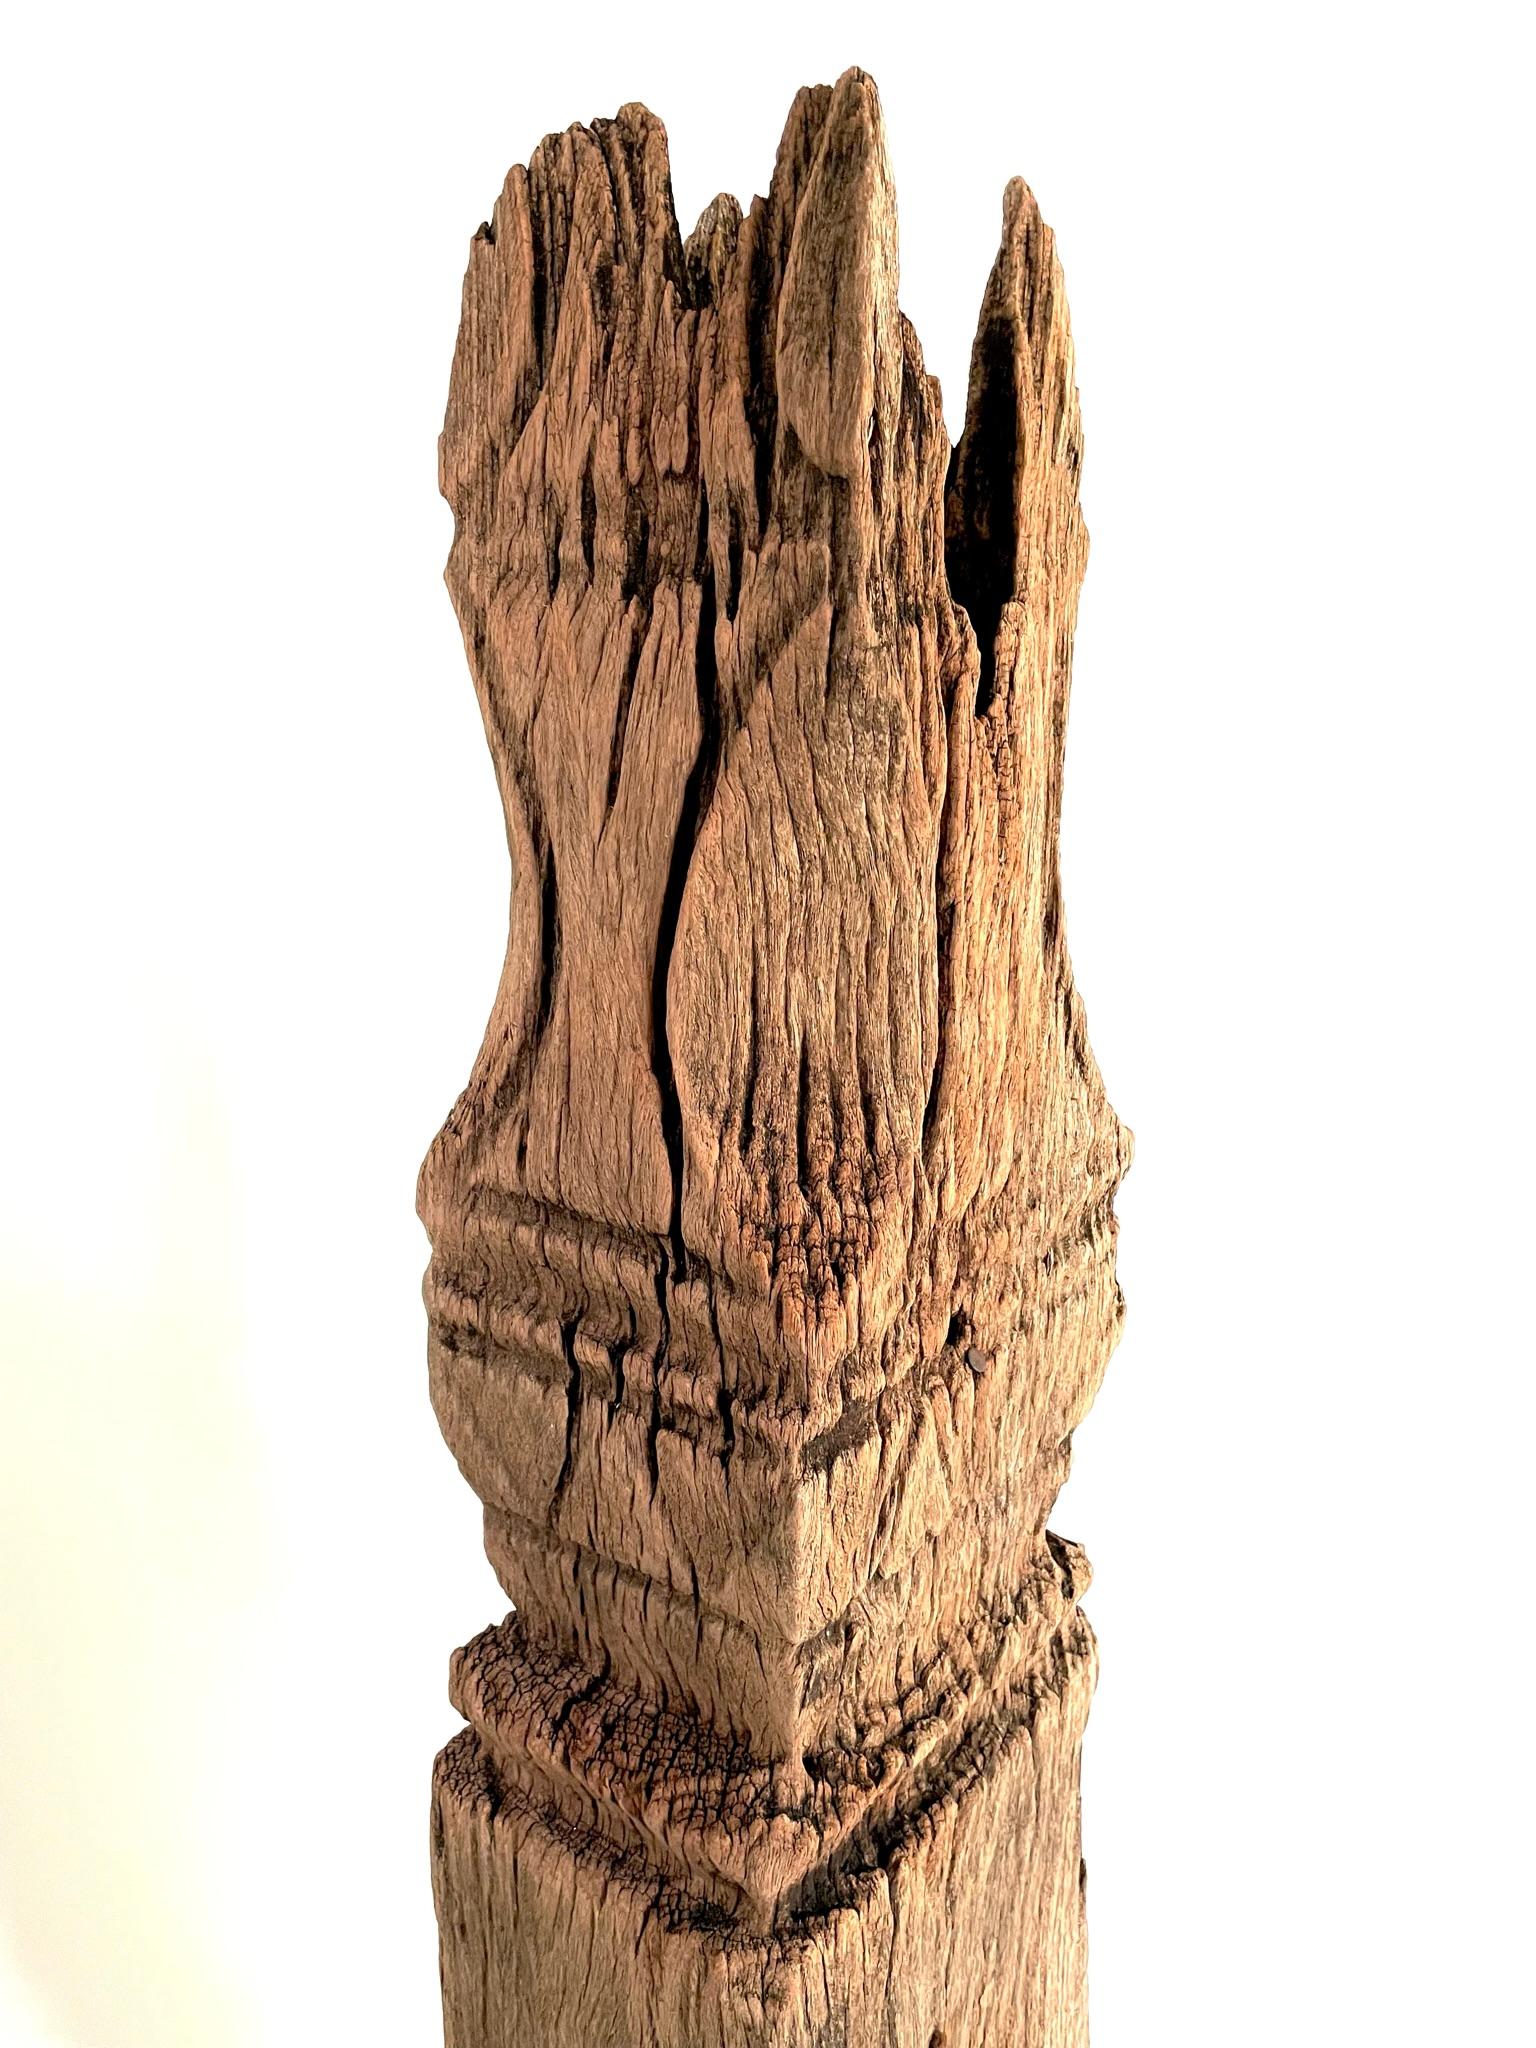 19th Century Thai Carved Wooden Stupa For Sale 6